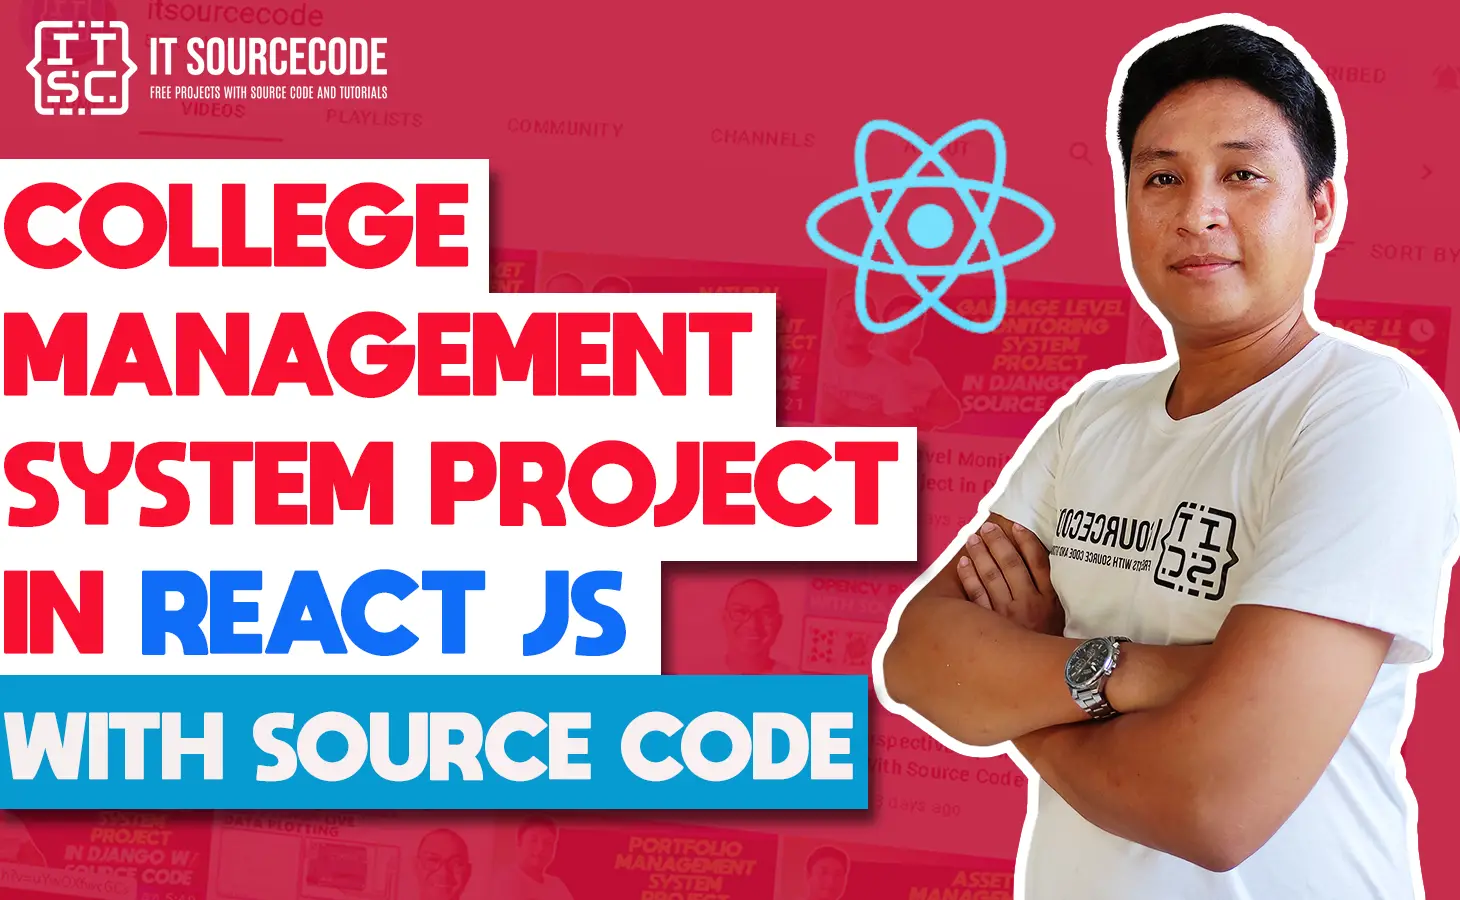 College Management System Project in React JS with Source Code